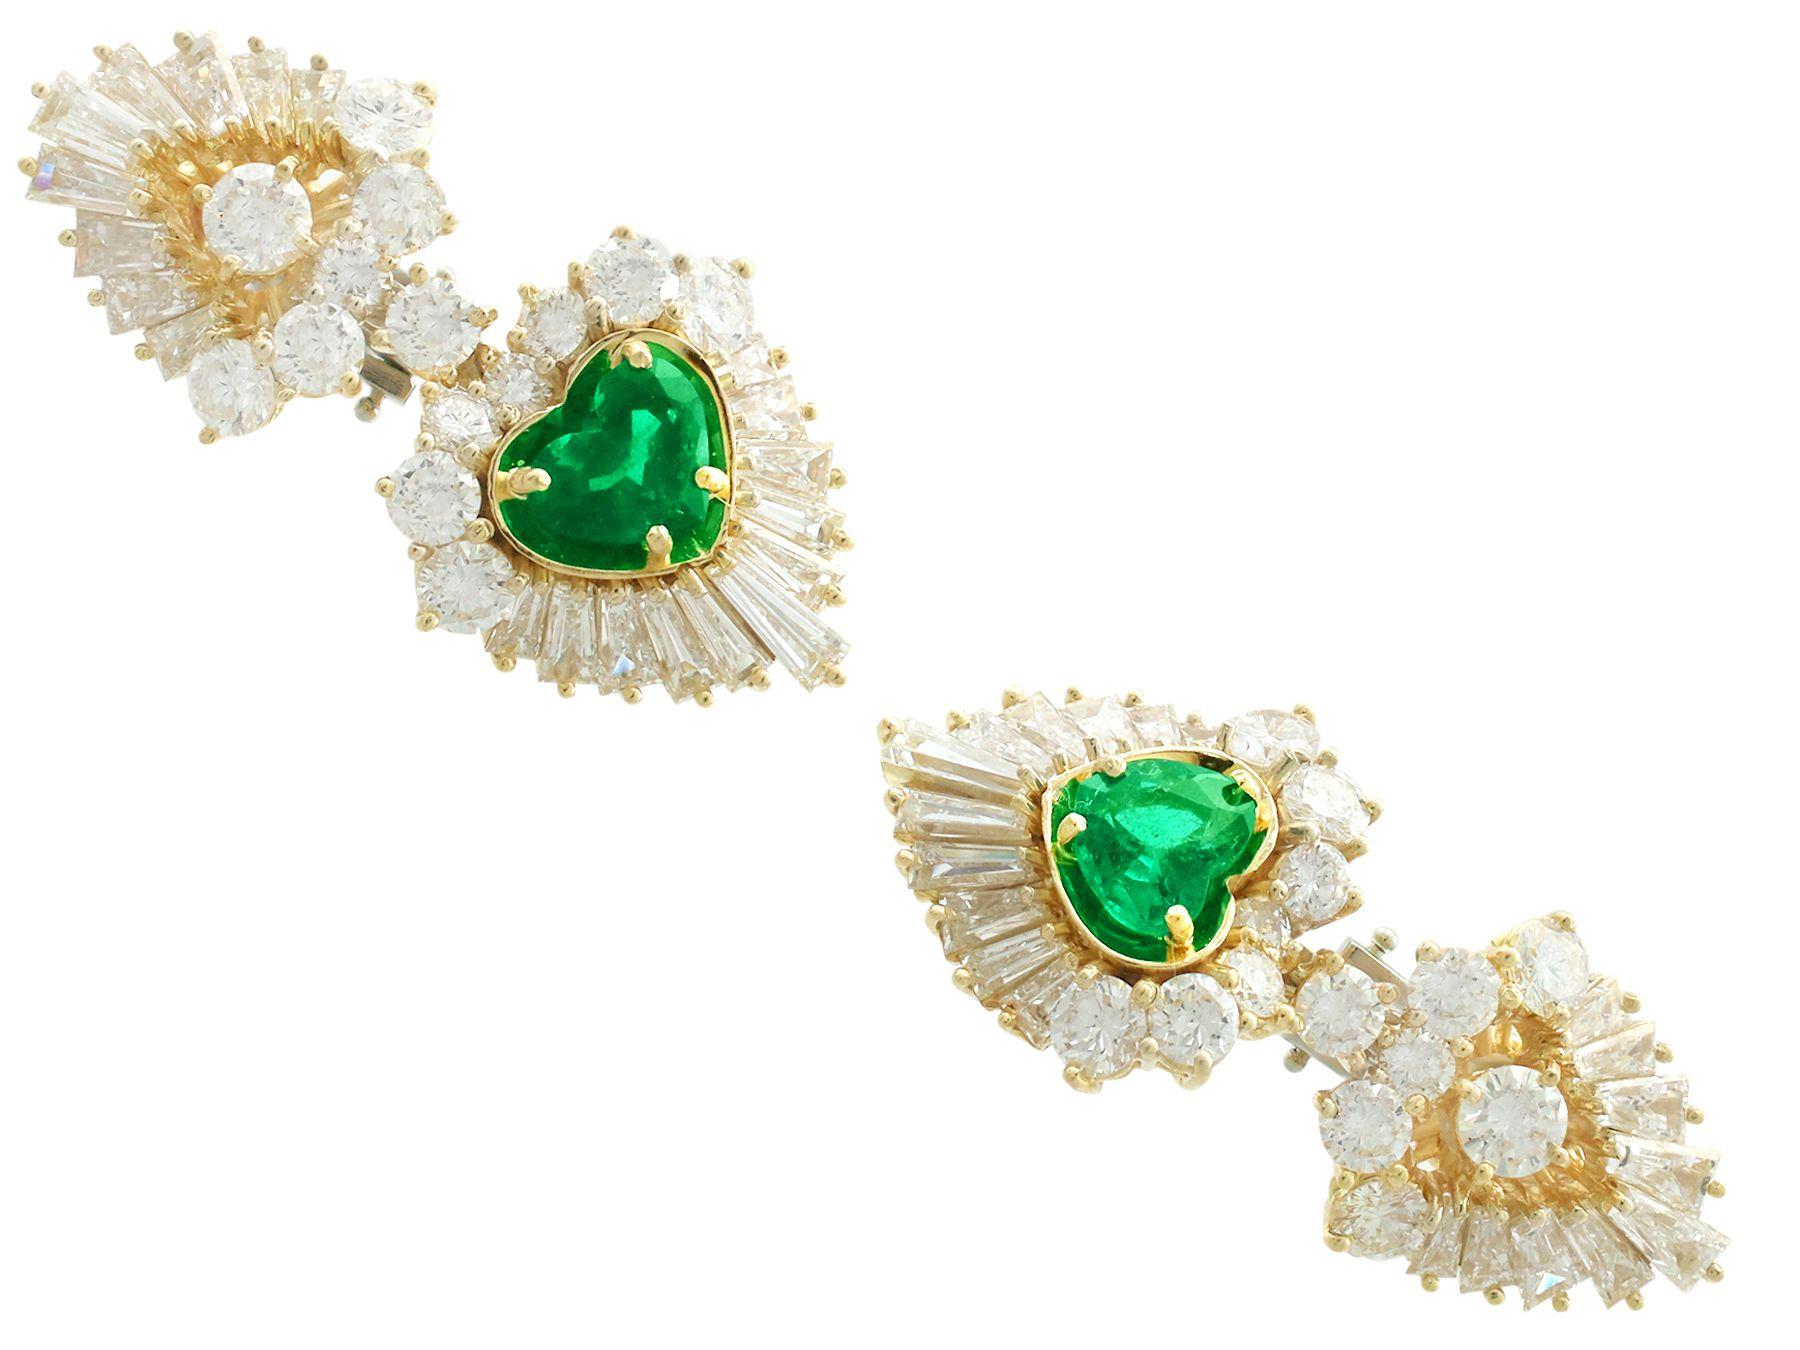 A stunning pair of 2.48 carat Zambian emerald and 7.05 carat diamond, 18 karat gold clip on earrings; part of our diverse vintage emerald jewelry collections

This stunning pair of emerald heart earrings has been crafted in 18k yellow gold with 18k